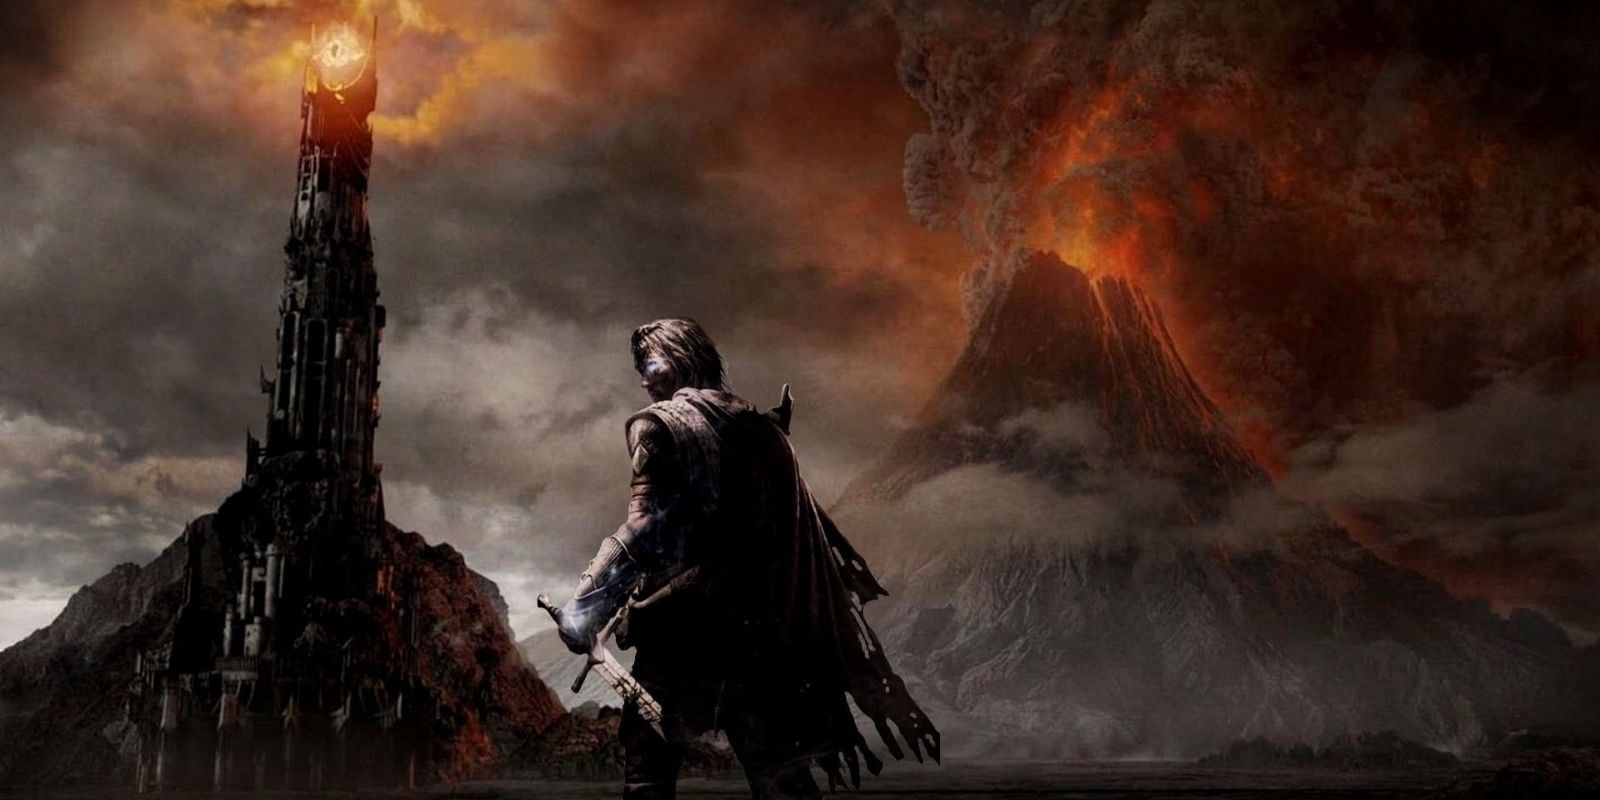 Lord of the Rings protagonist approaches Mount Doom in video game art